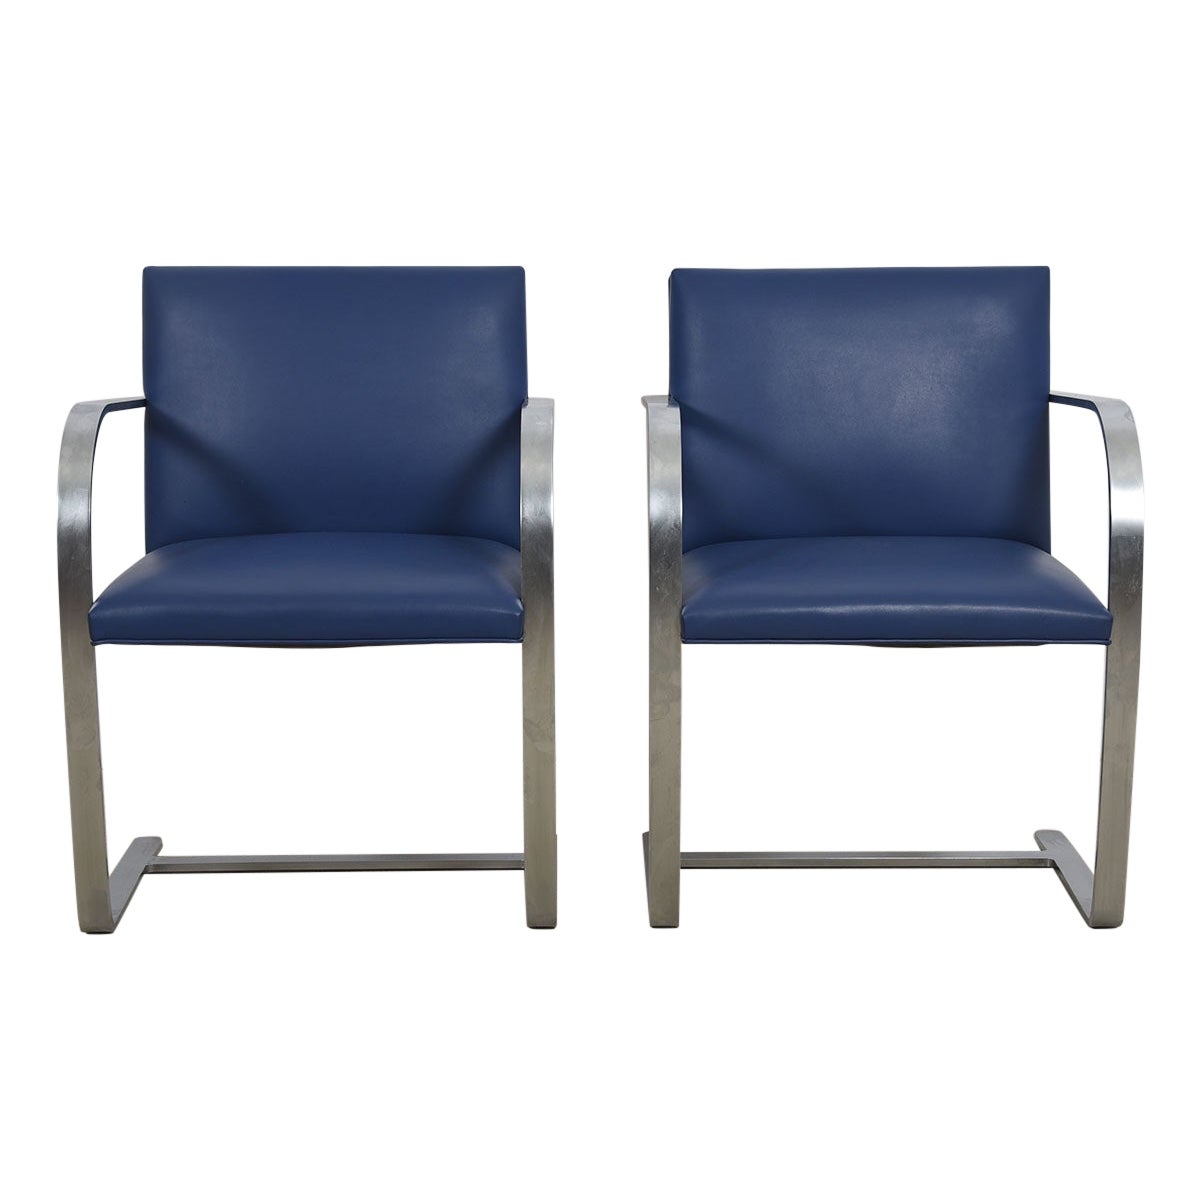 Pair of Stainless Steel Flat Bar Brno Chairs with Cadet Blue Leather Upholstery For Sale